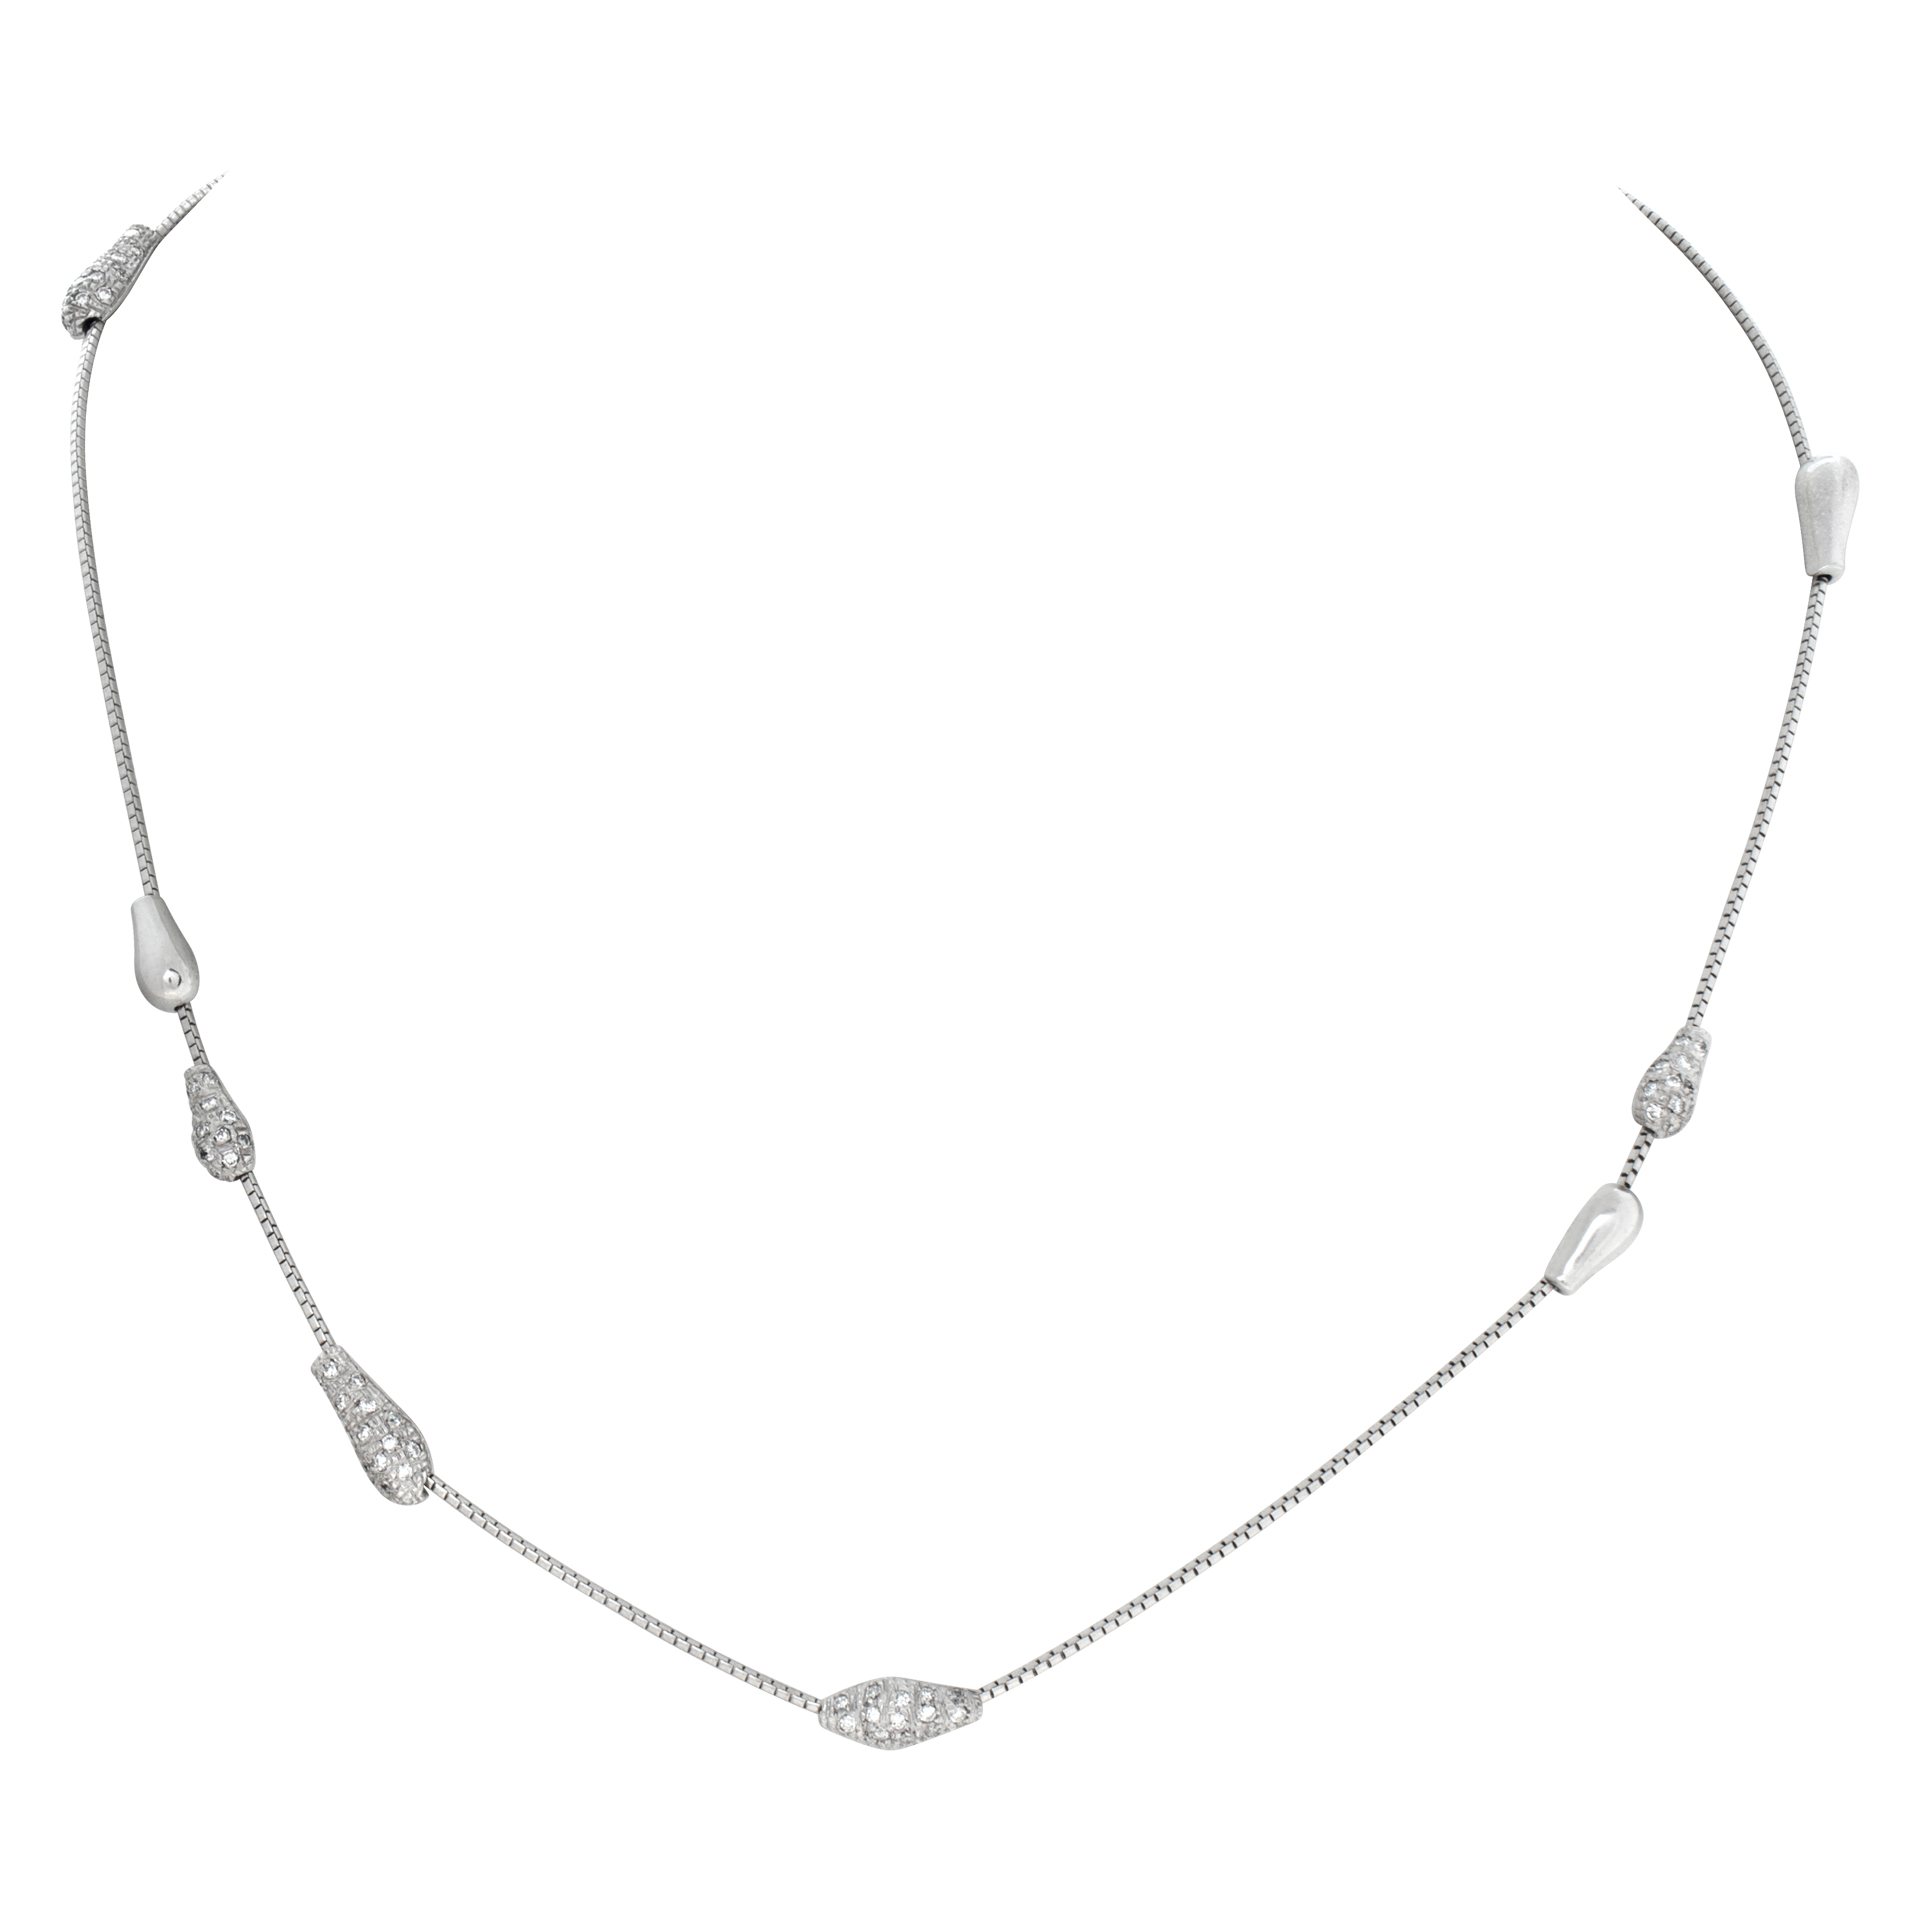 Designer signed Henry Stern diamonds necklace set in 18K white gold. Round brilliant cut diamonds total approx weight 1.00 carat, image 1